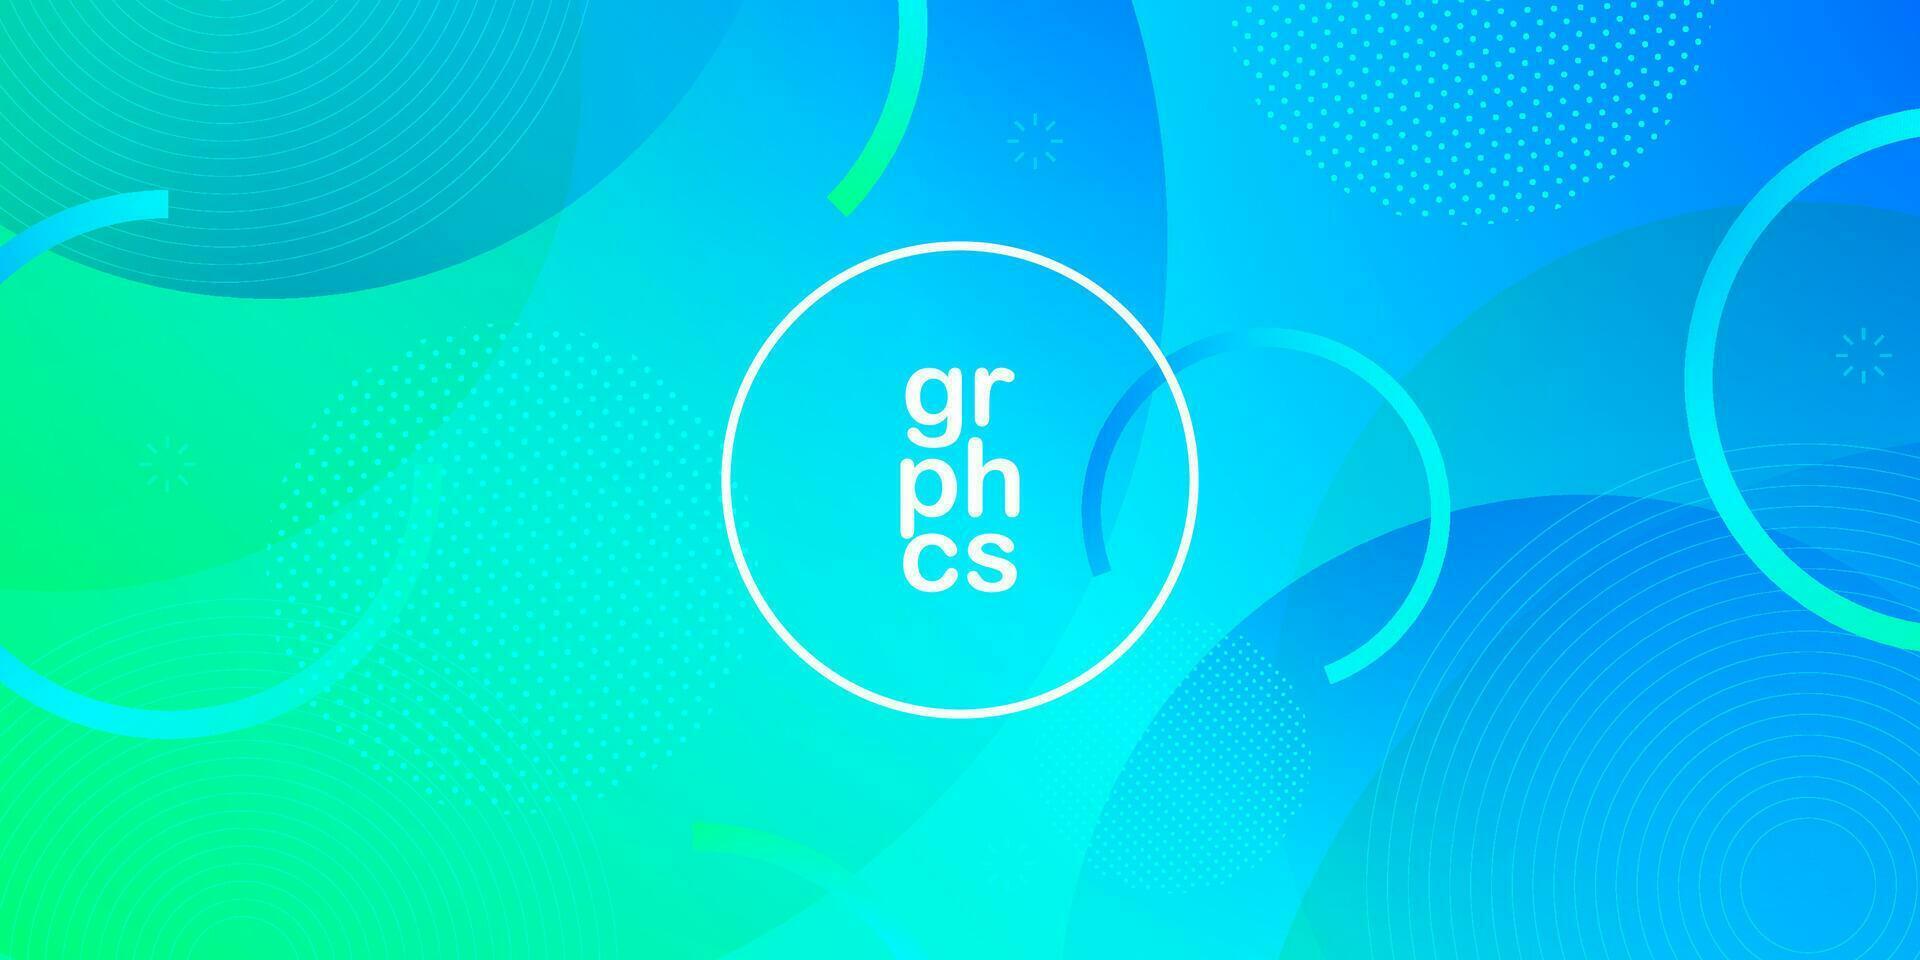 Abstract 3d bright blue and green gradient illustration background with simple circle shape pattern. Cool design. Eps10 vector